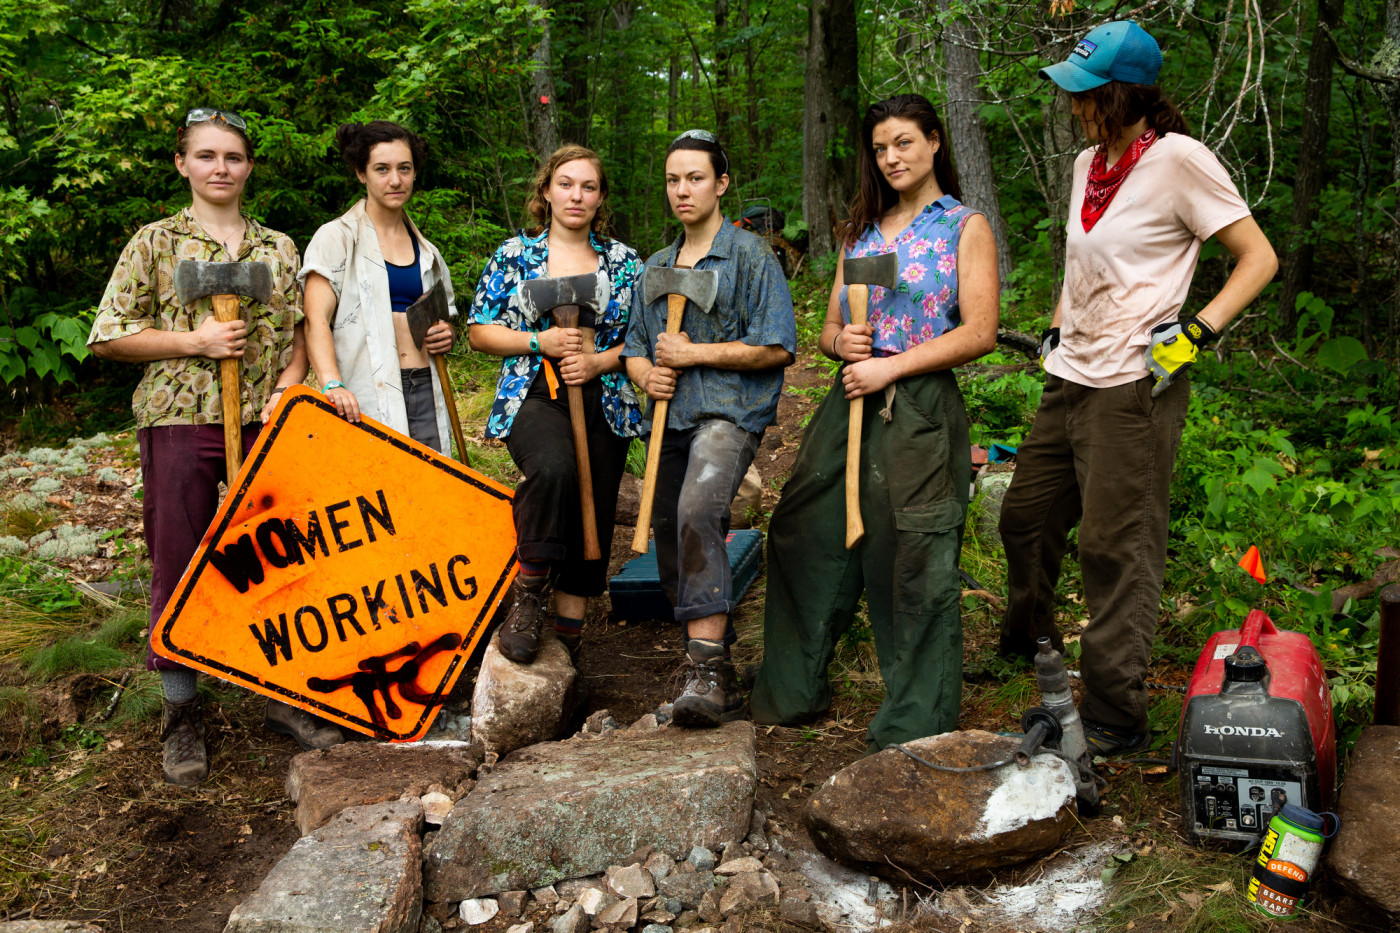 The Adirondack Trail Crew, from left: Char, Crandy, Nami, Nips, Two-Scent, and Kirby.